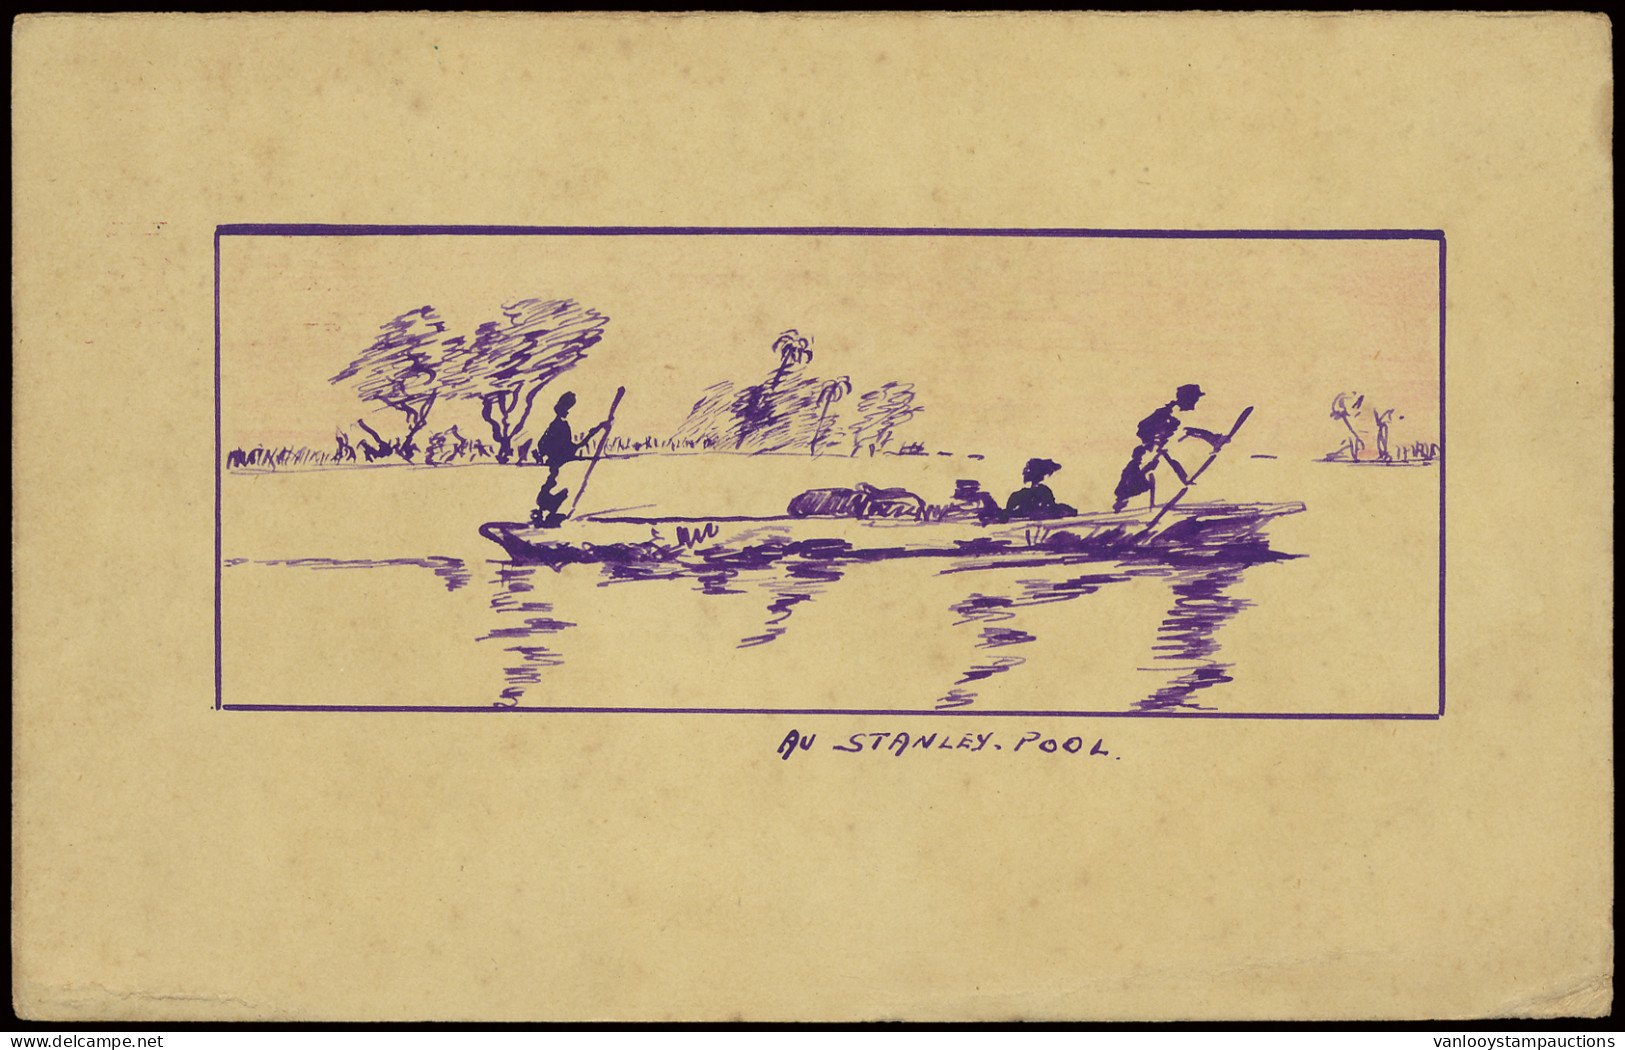 Postal Stationery Catalogue Stibbe N° 49 Request, Mint, With Hand Drawing Of A View Of A Canoe On Reverse Side Au Stanle - Stamped Stationery